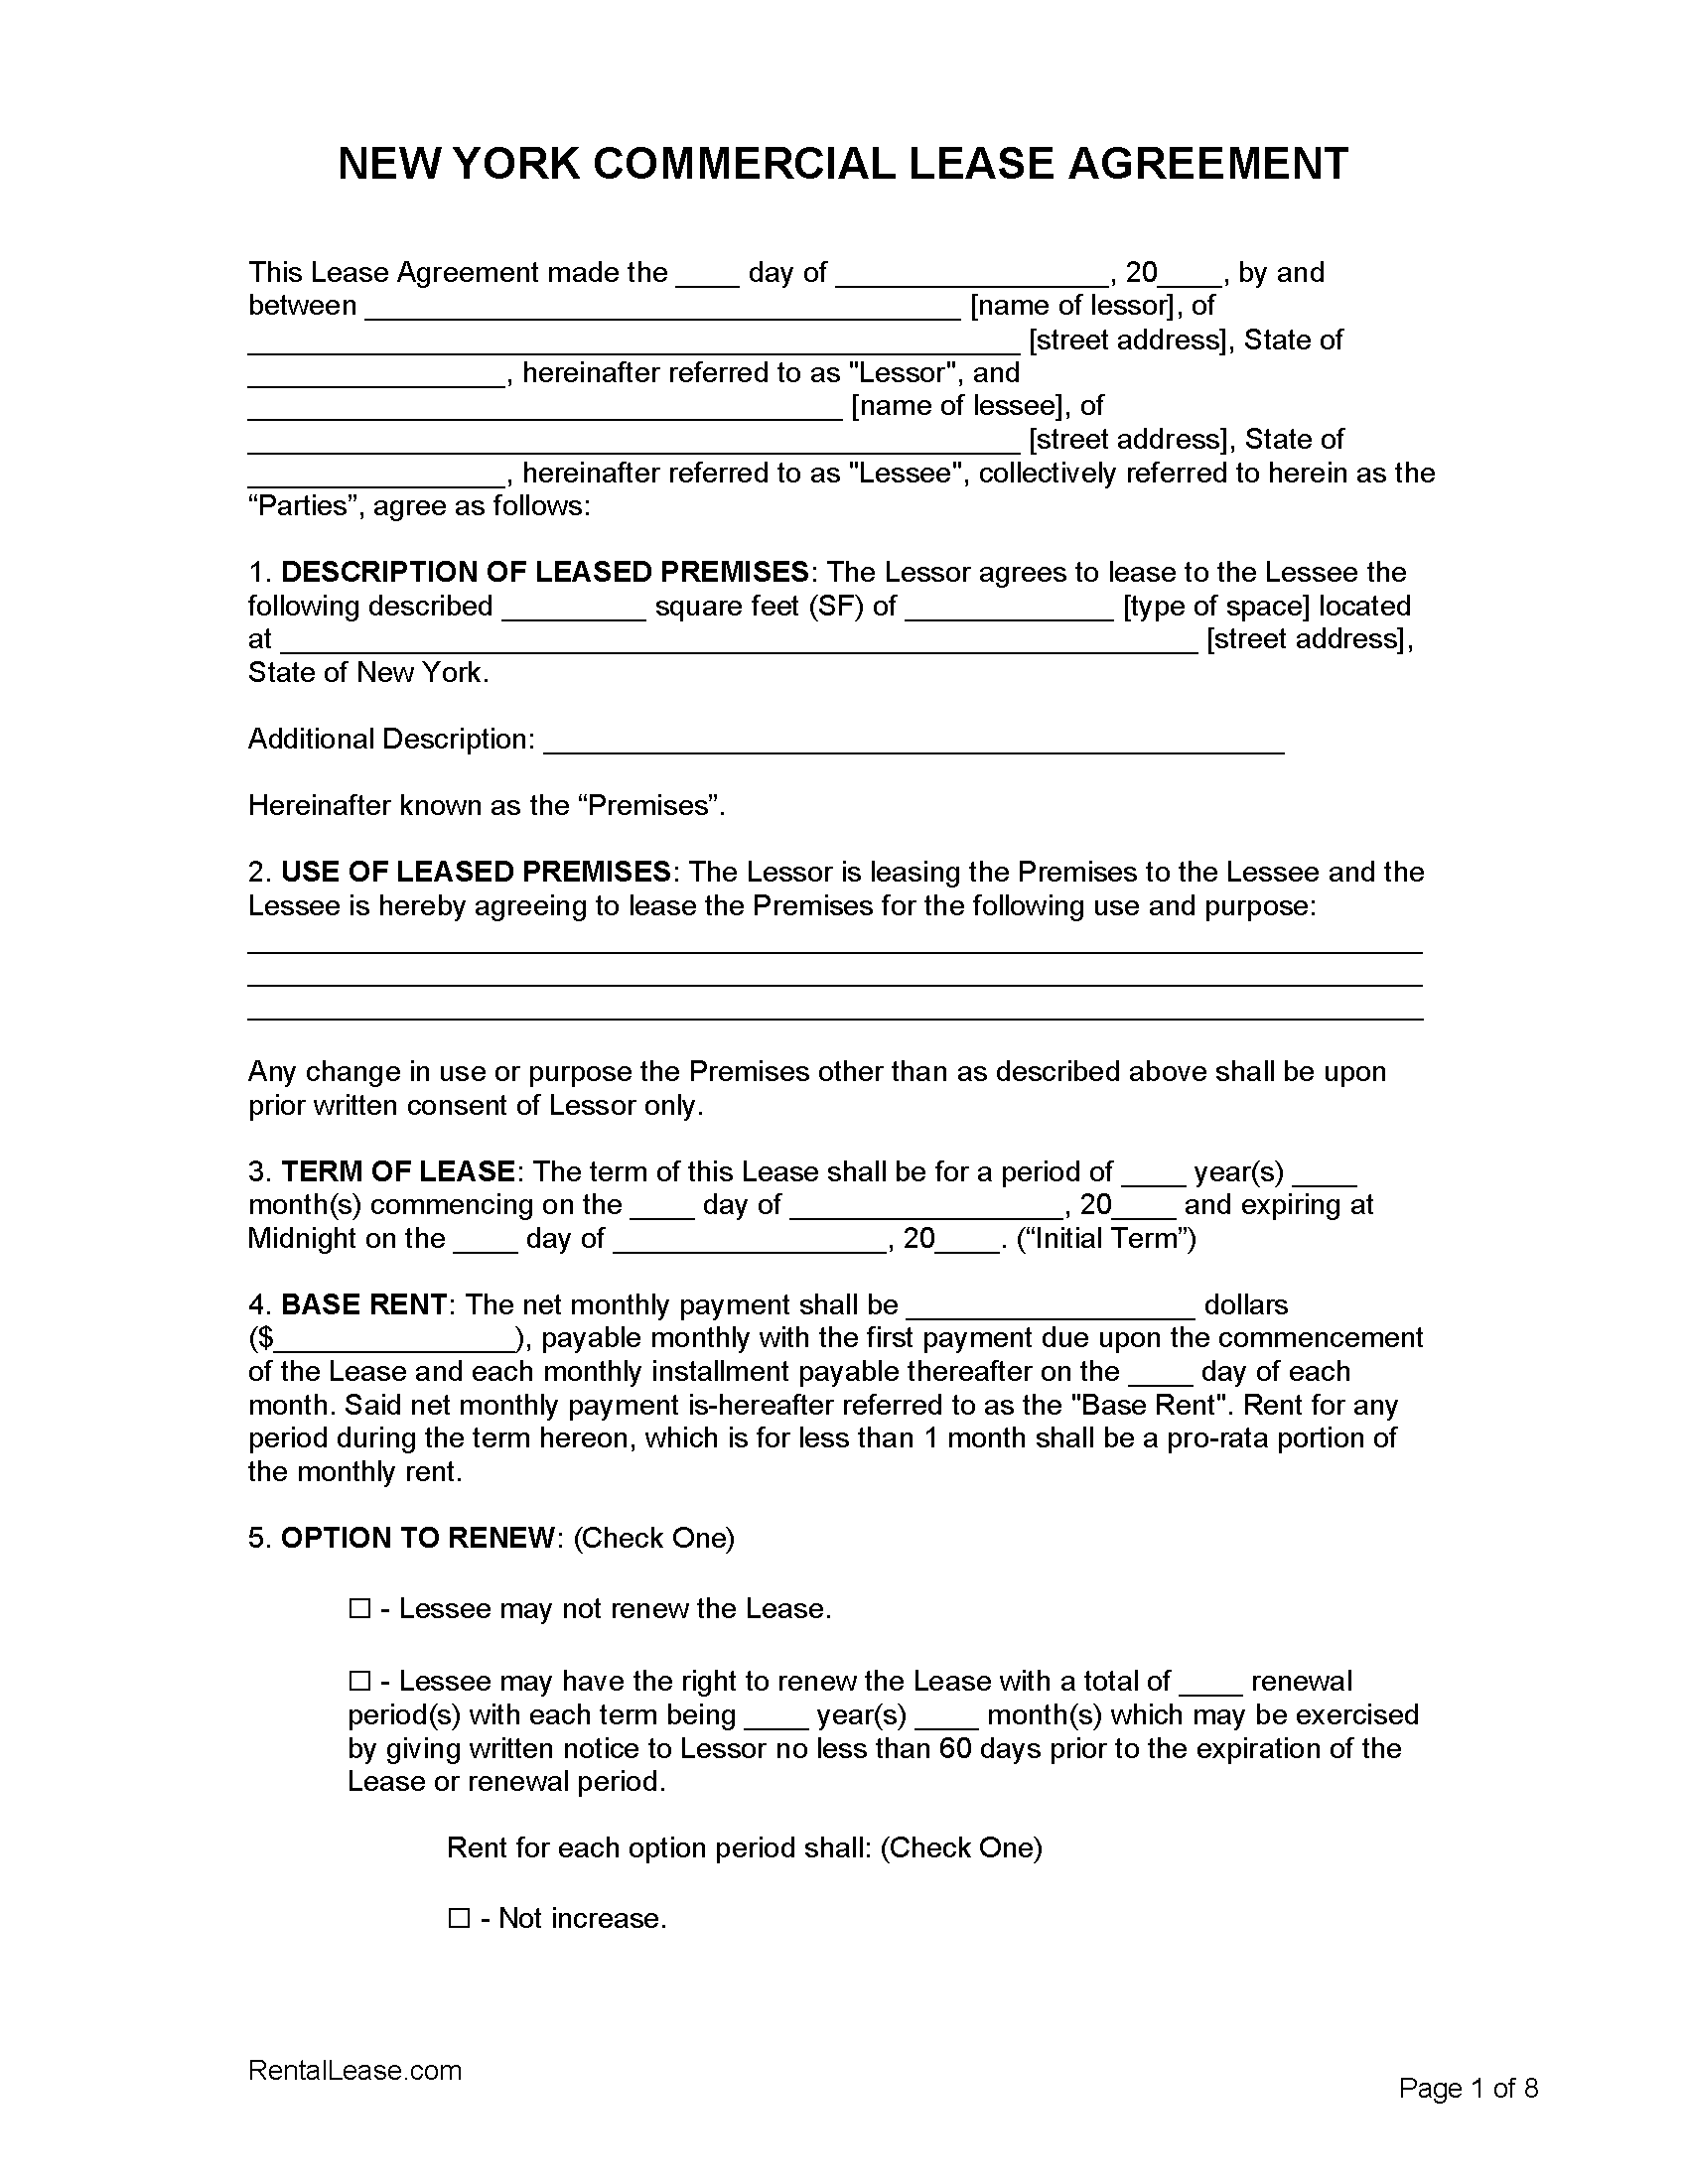 free new york commercial lease agreement template pdf